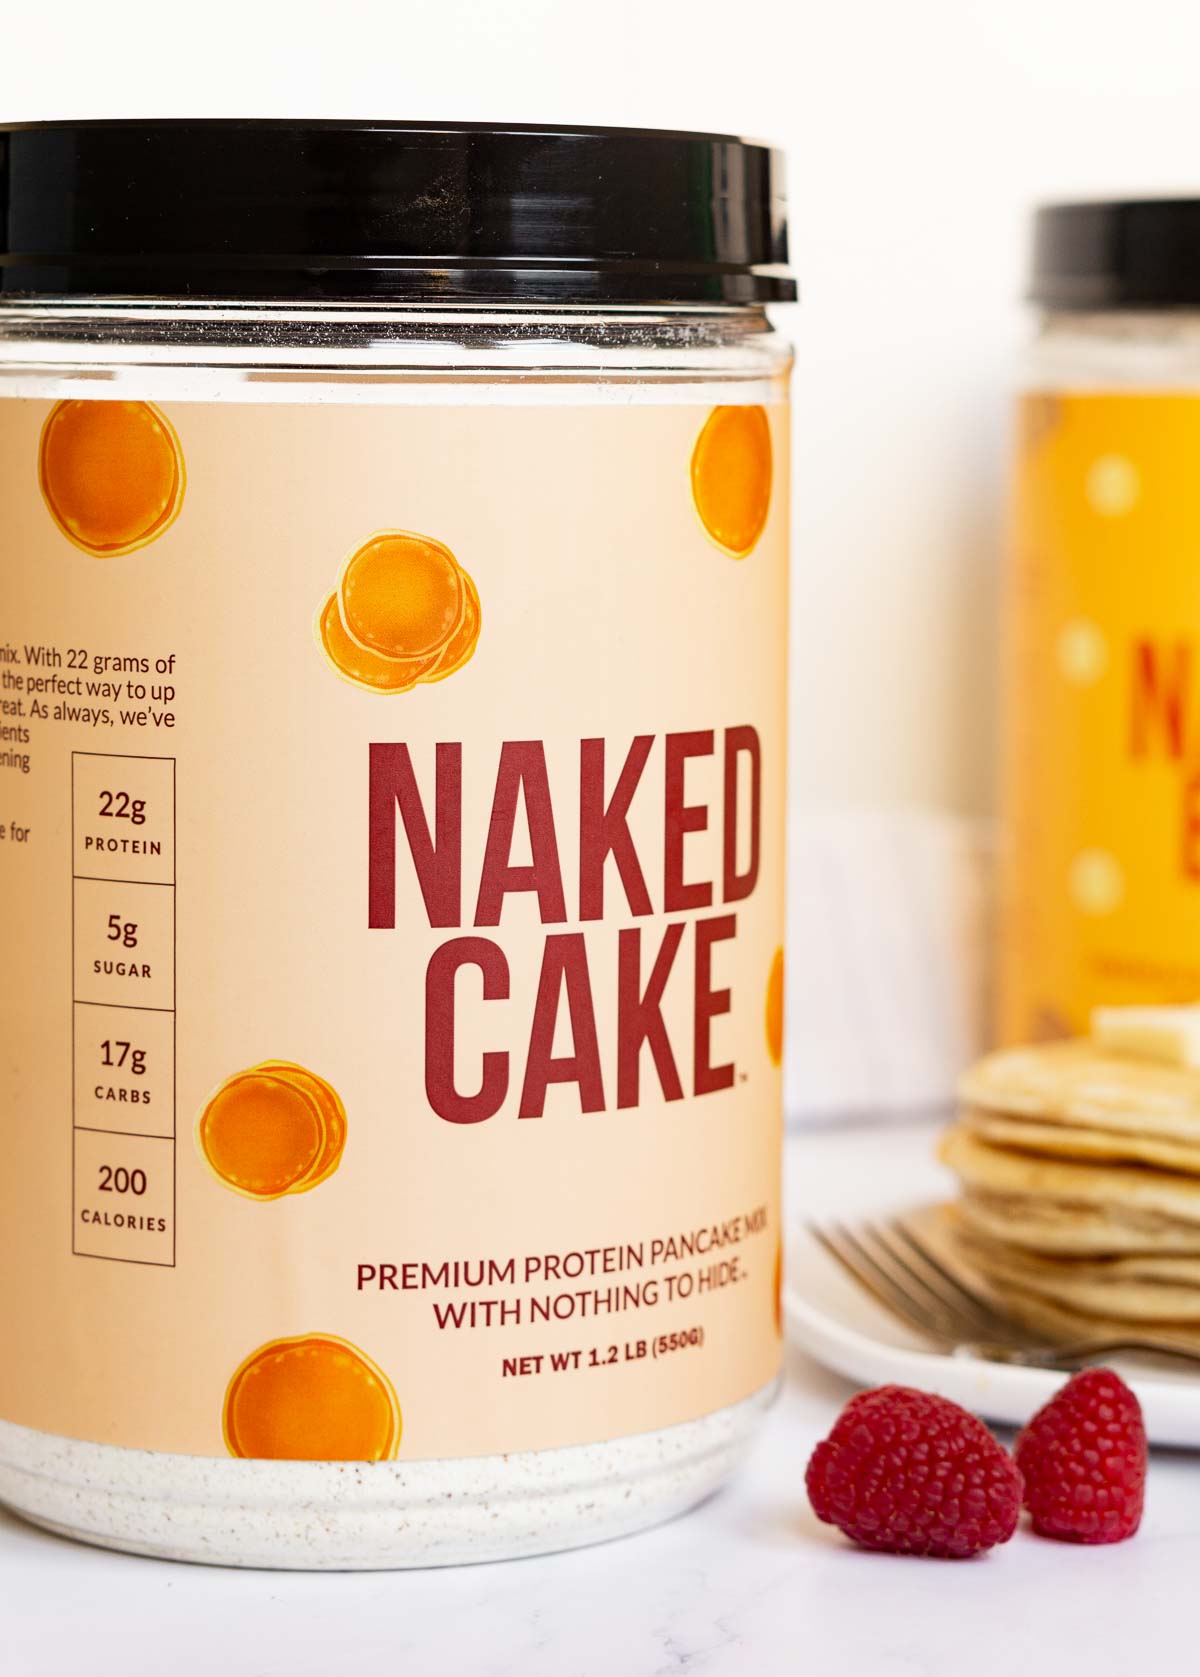 Container of Naked Cake pancake protein mix showing the nutrition info